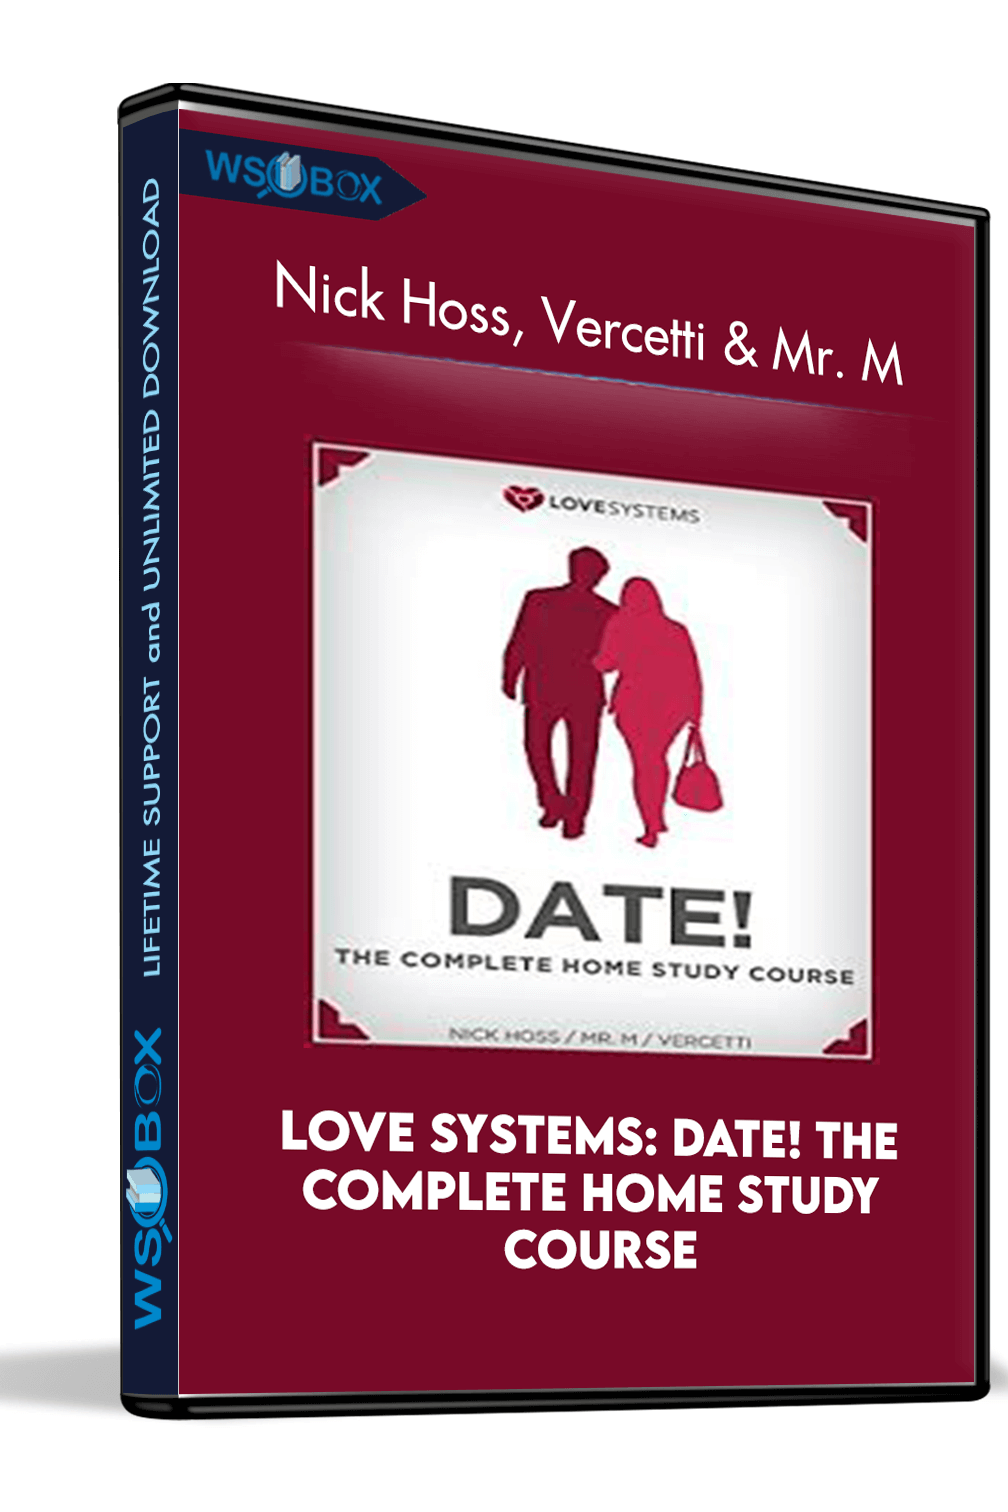 love-systems-date-the-complete-home-study-course-nick-hoss-vercetti-mr-m